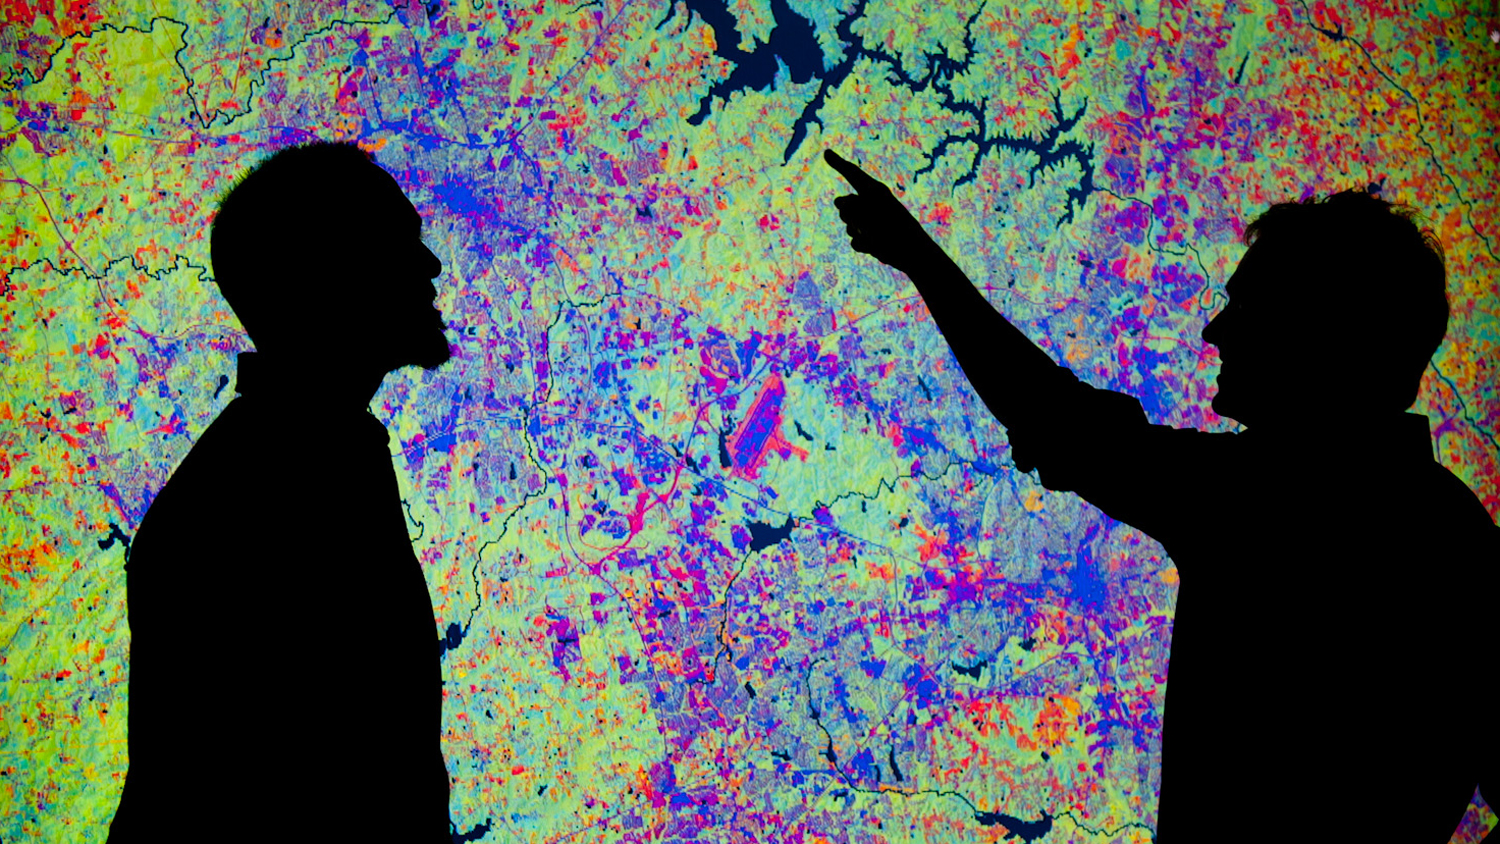 Two human shadows against a brightly colored map.